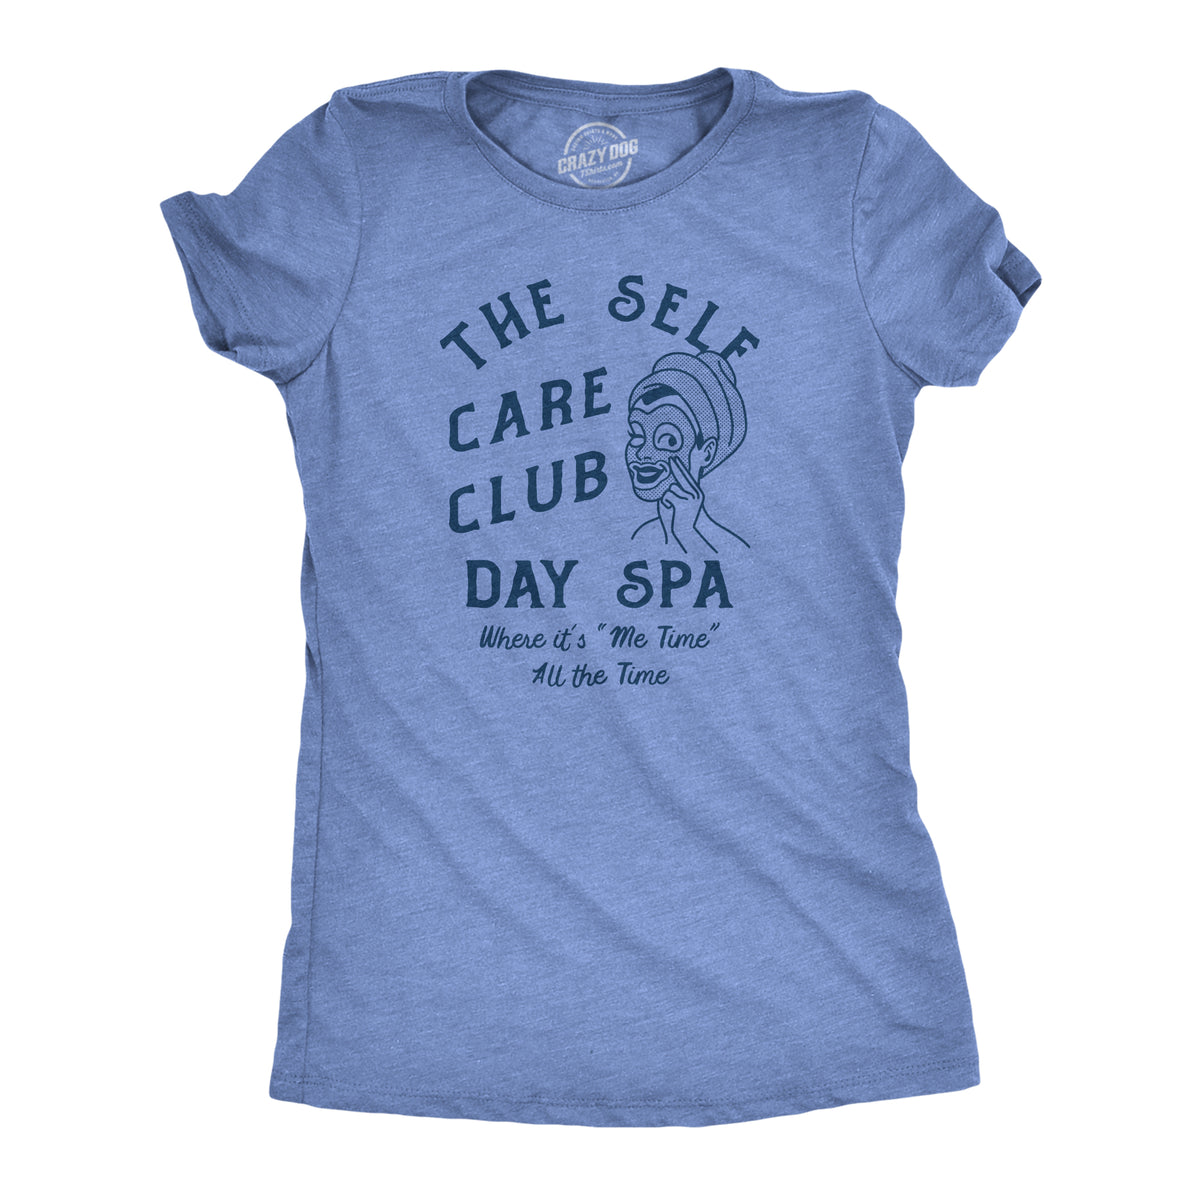 Funny Light Heather Blue - SELFCARE The Self Care Club Day Spa Womens T Shirt Nerdy Sarcastic Tee